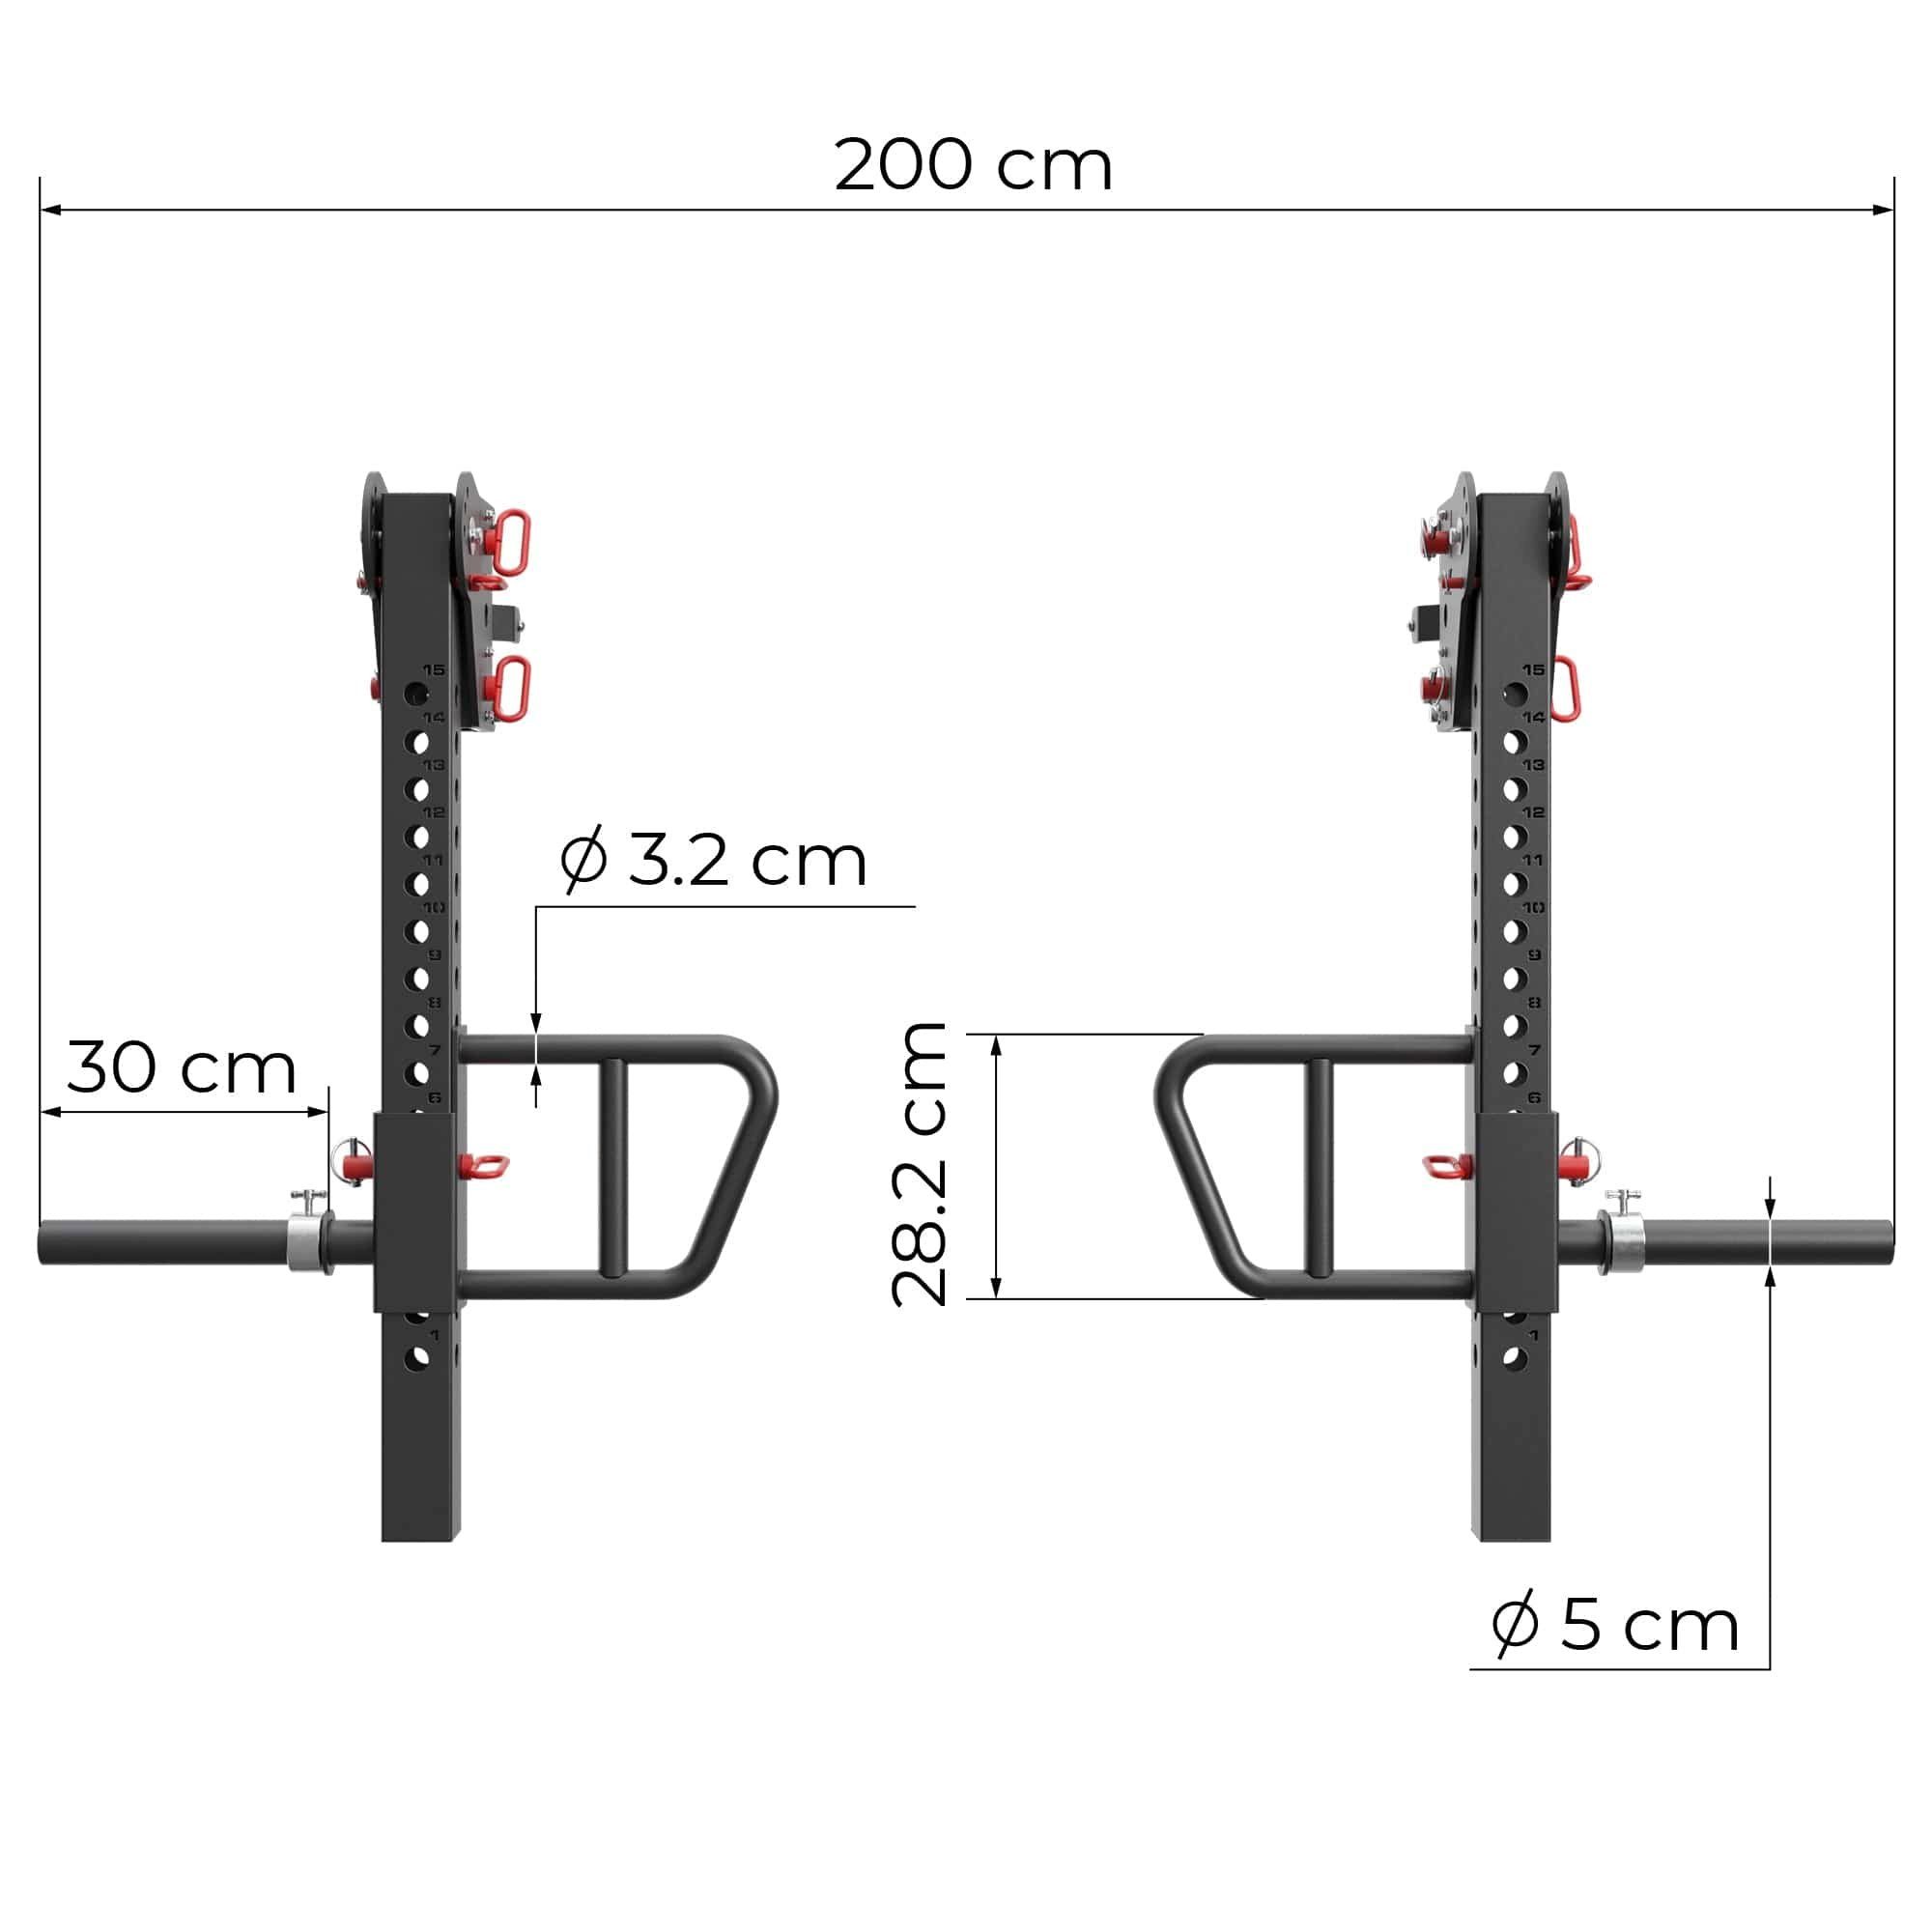 ATLETICA Power Rack R8-Jammer Arms, 75x75x3 54 Stahlprofil, mm kg, 110 cm